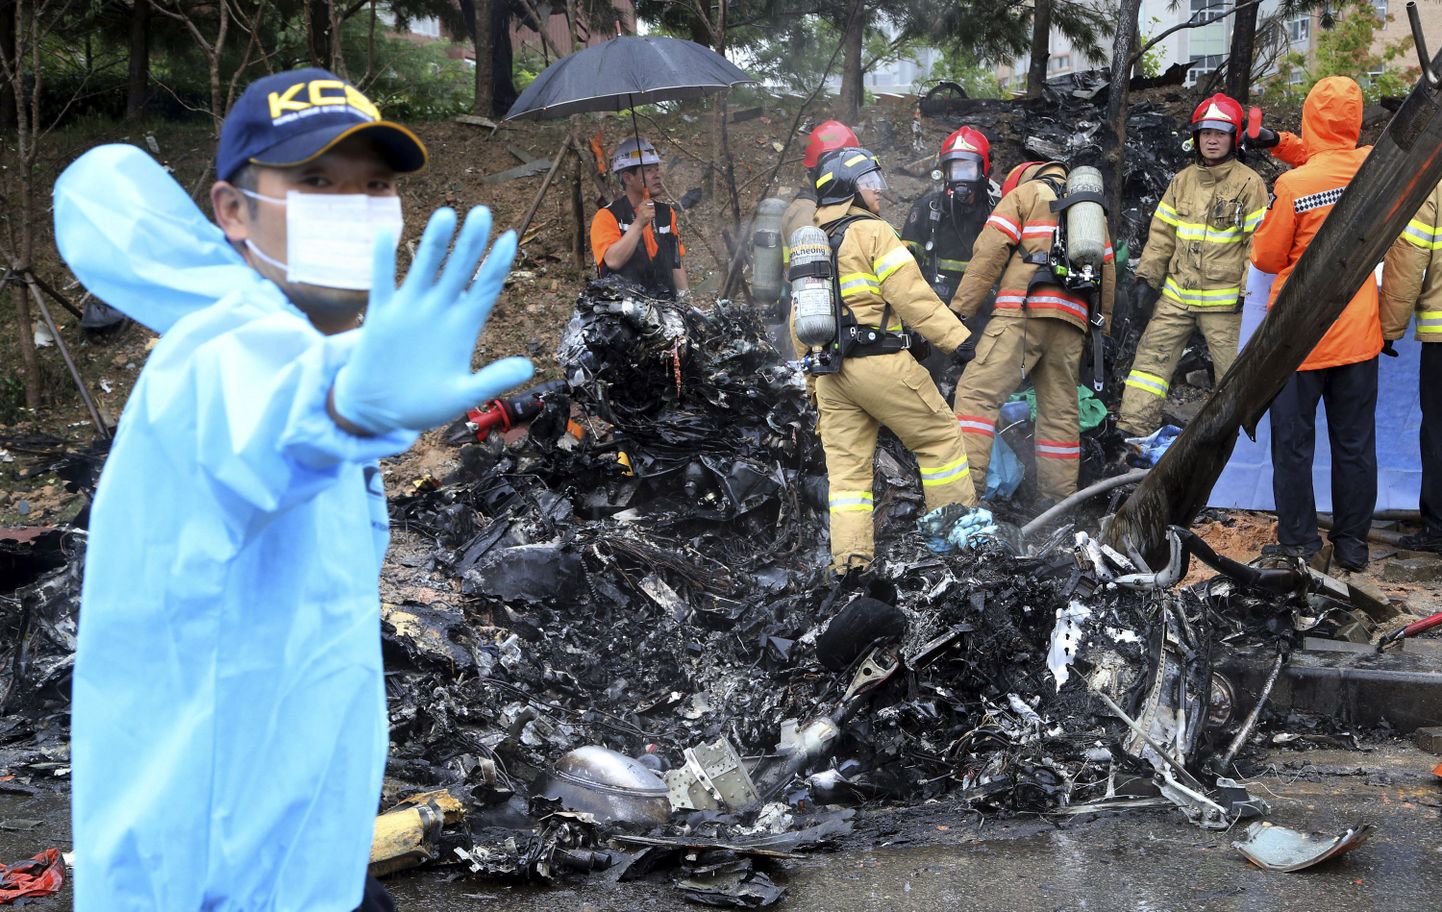 Firefighters inspect the wreckage of a helicopter which crashed near an apartment complex and school in Gwangju, South Korea, Thursday, July 17, 2014. The firefighting helicopter crashed Thursday, killing two people, officials said. (AP Photo/Yonhap, Park Chul-hong) KOREA OUT / TT / kod 436